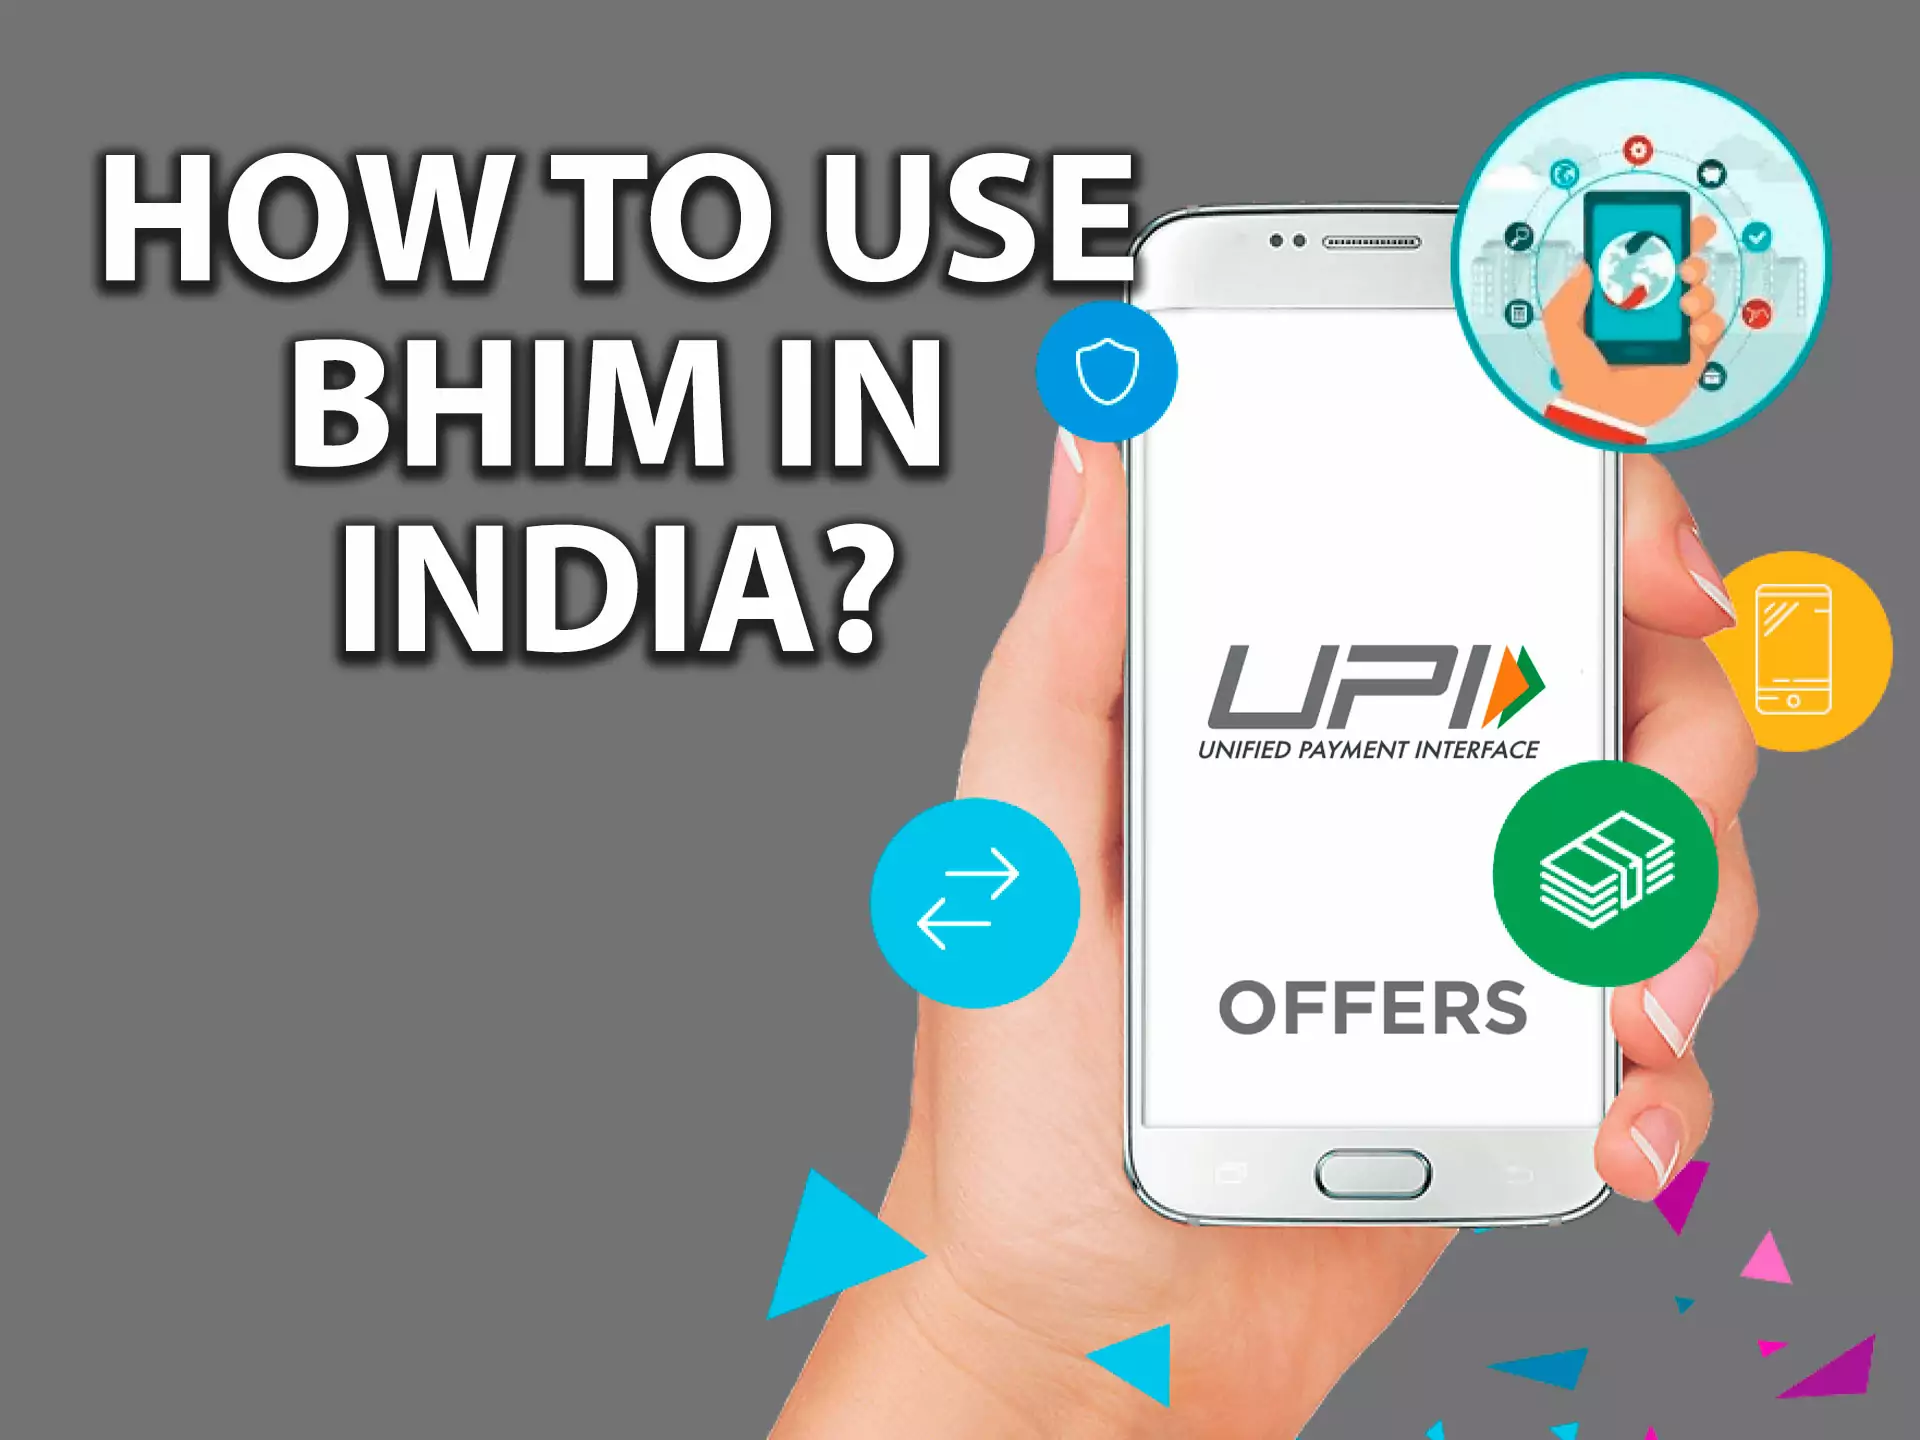 You can download the BHIM app on your Android or iOS mobile phone.